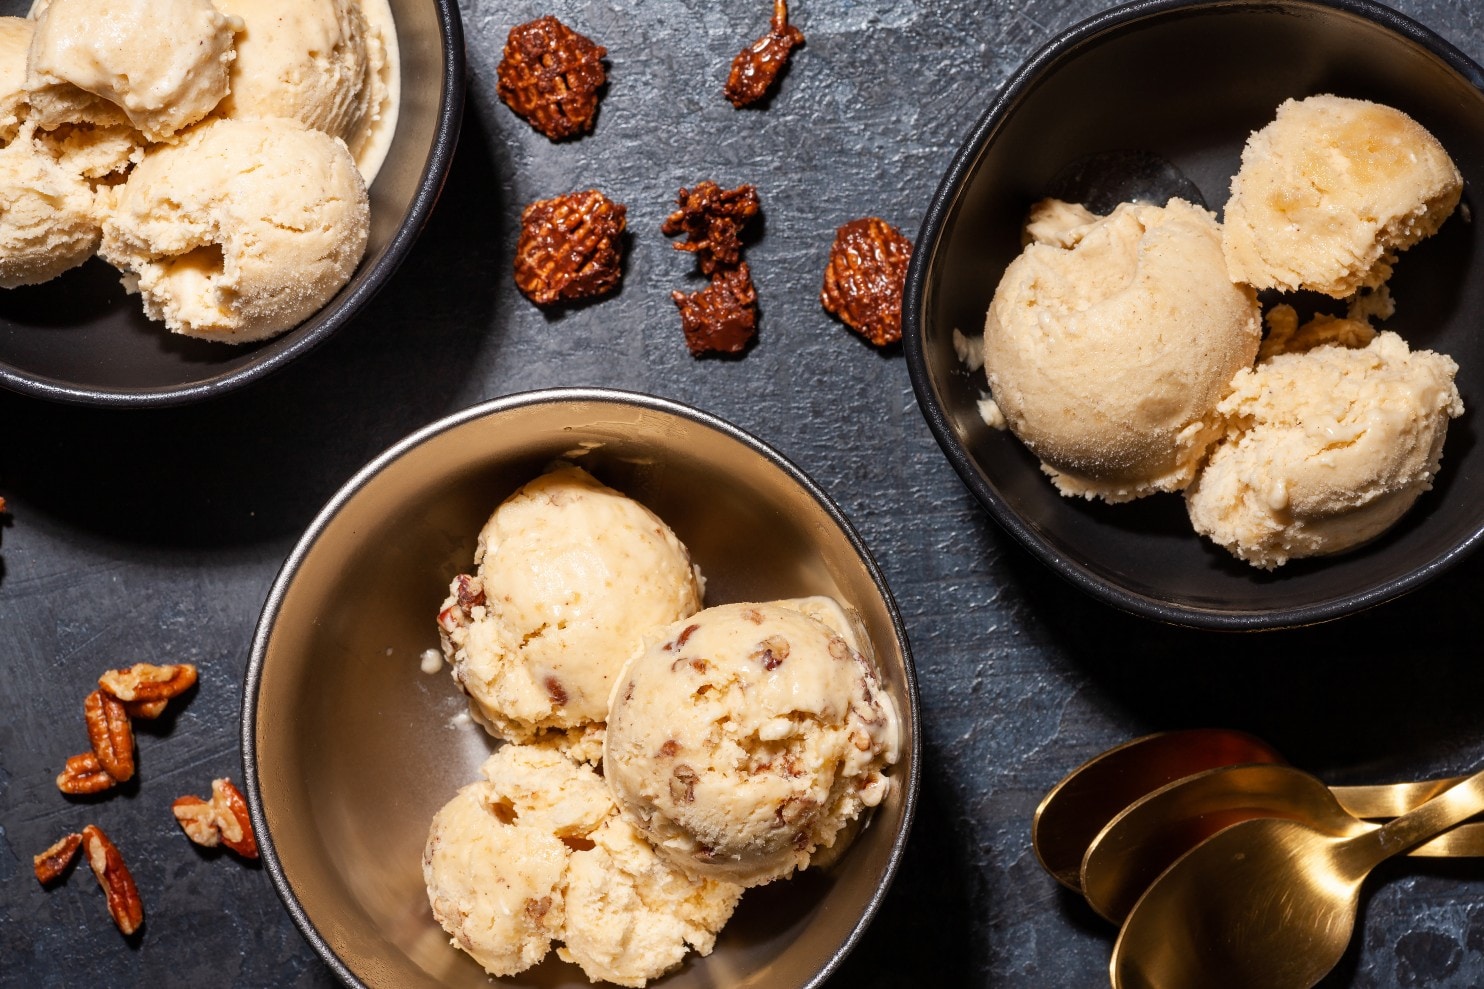 🍴 If You’ve Tried 18/27 of These Foods, You’re a Sophisticated Eater Bourbon Ice Cream